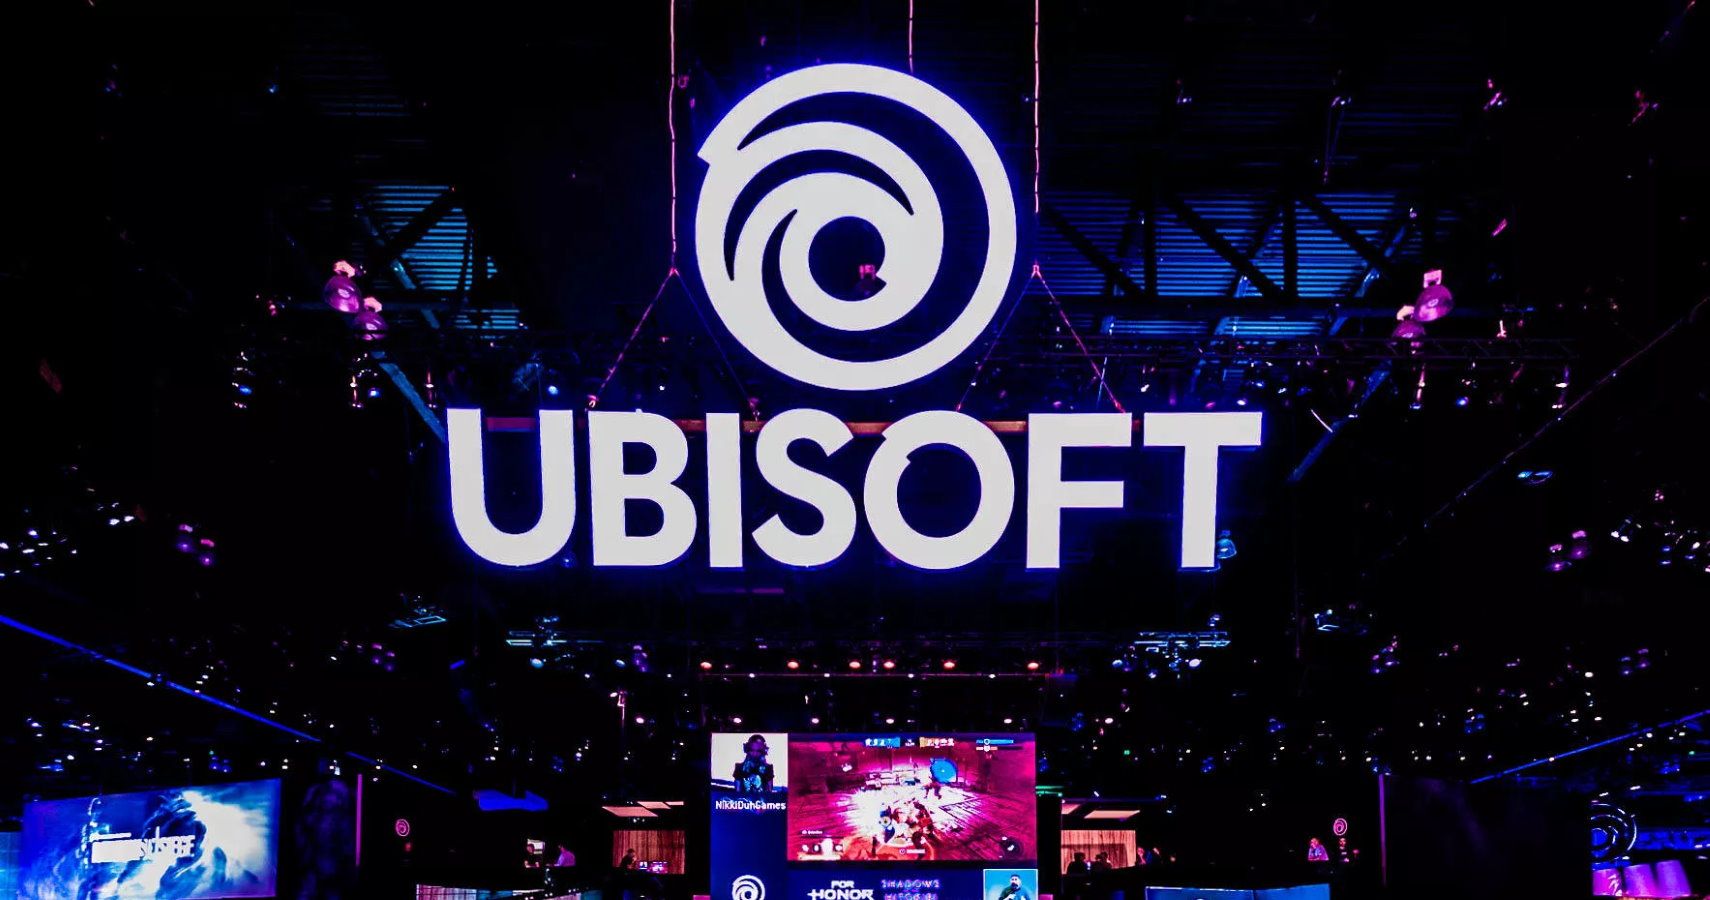 Yet Another Ubisoft Exec Resigns Amidst Sexual Harassment Investigation